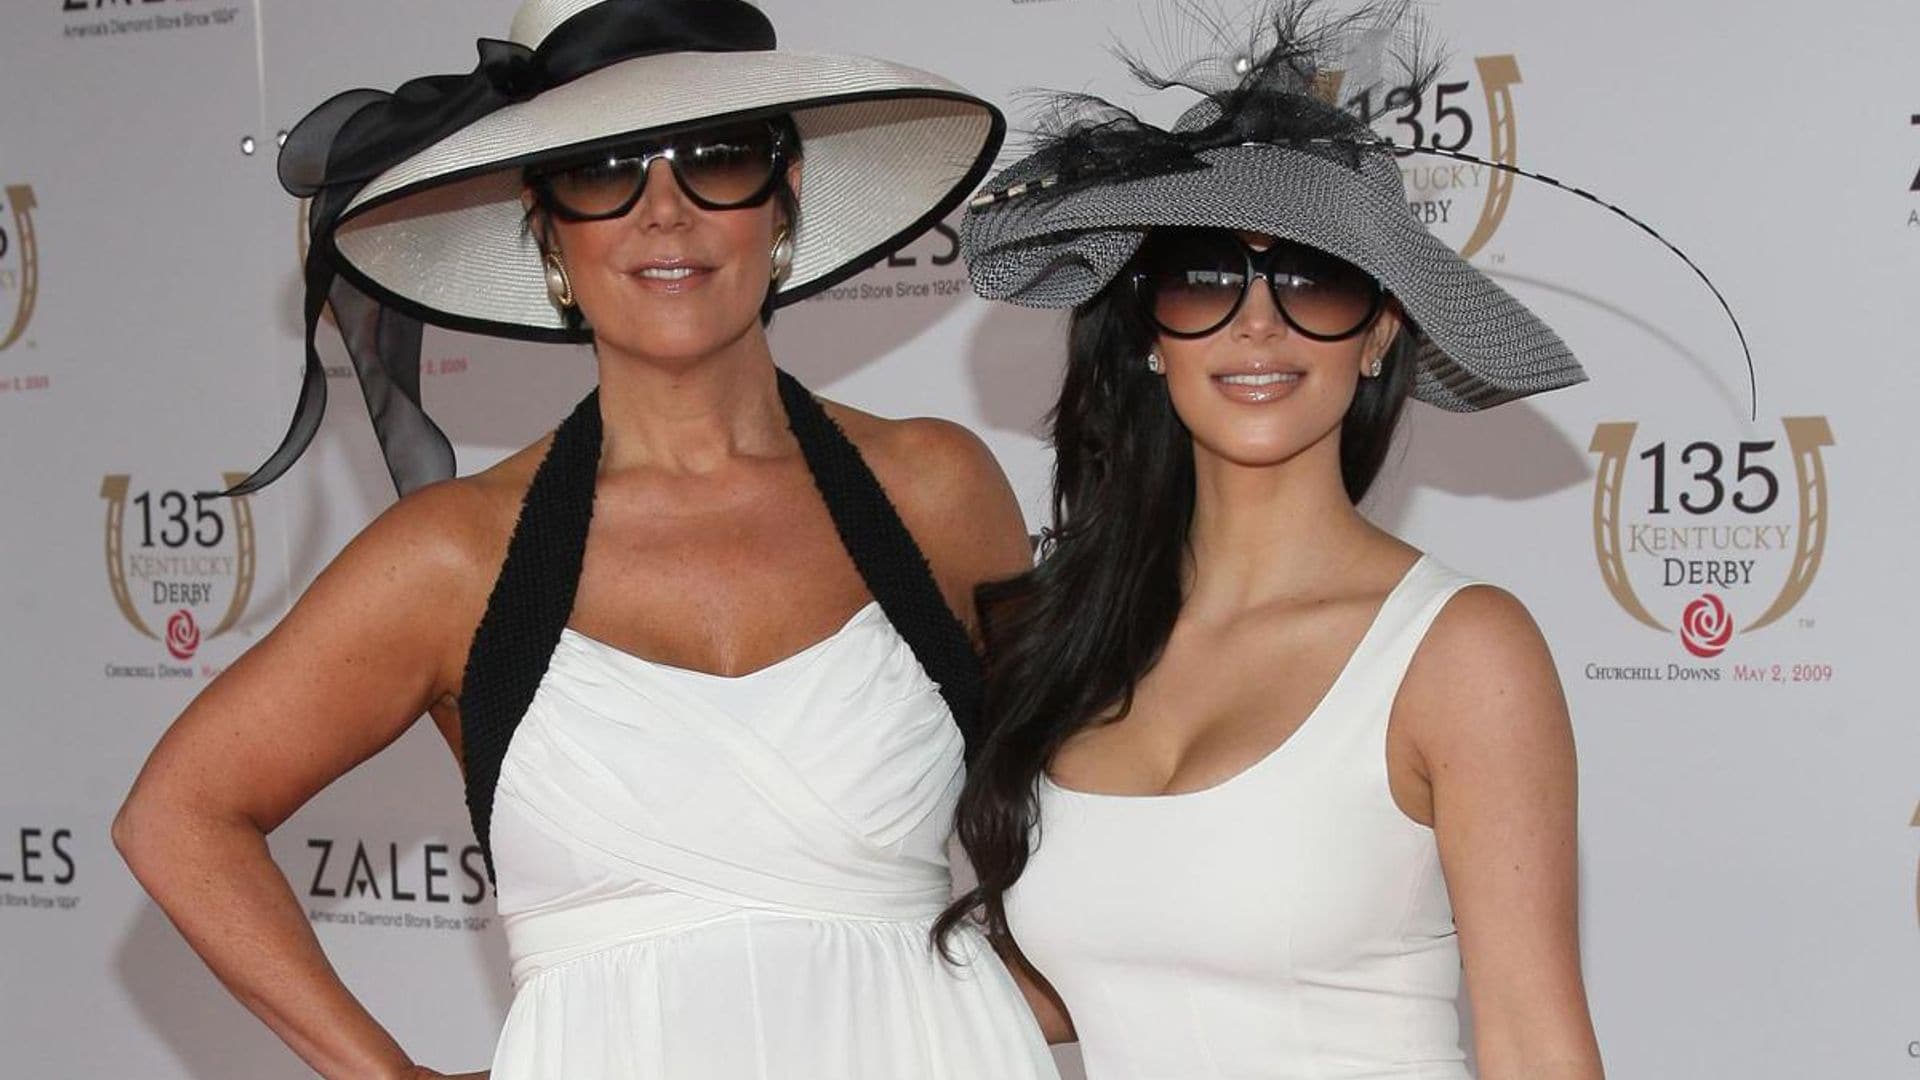 Kentucky Derby: Celebrities attending the annual horse race over the years